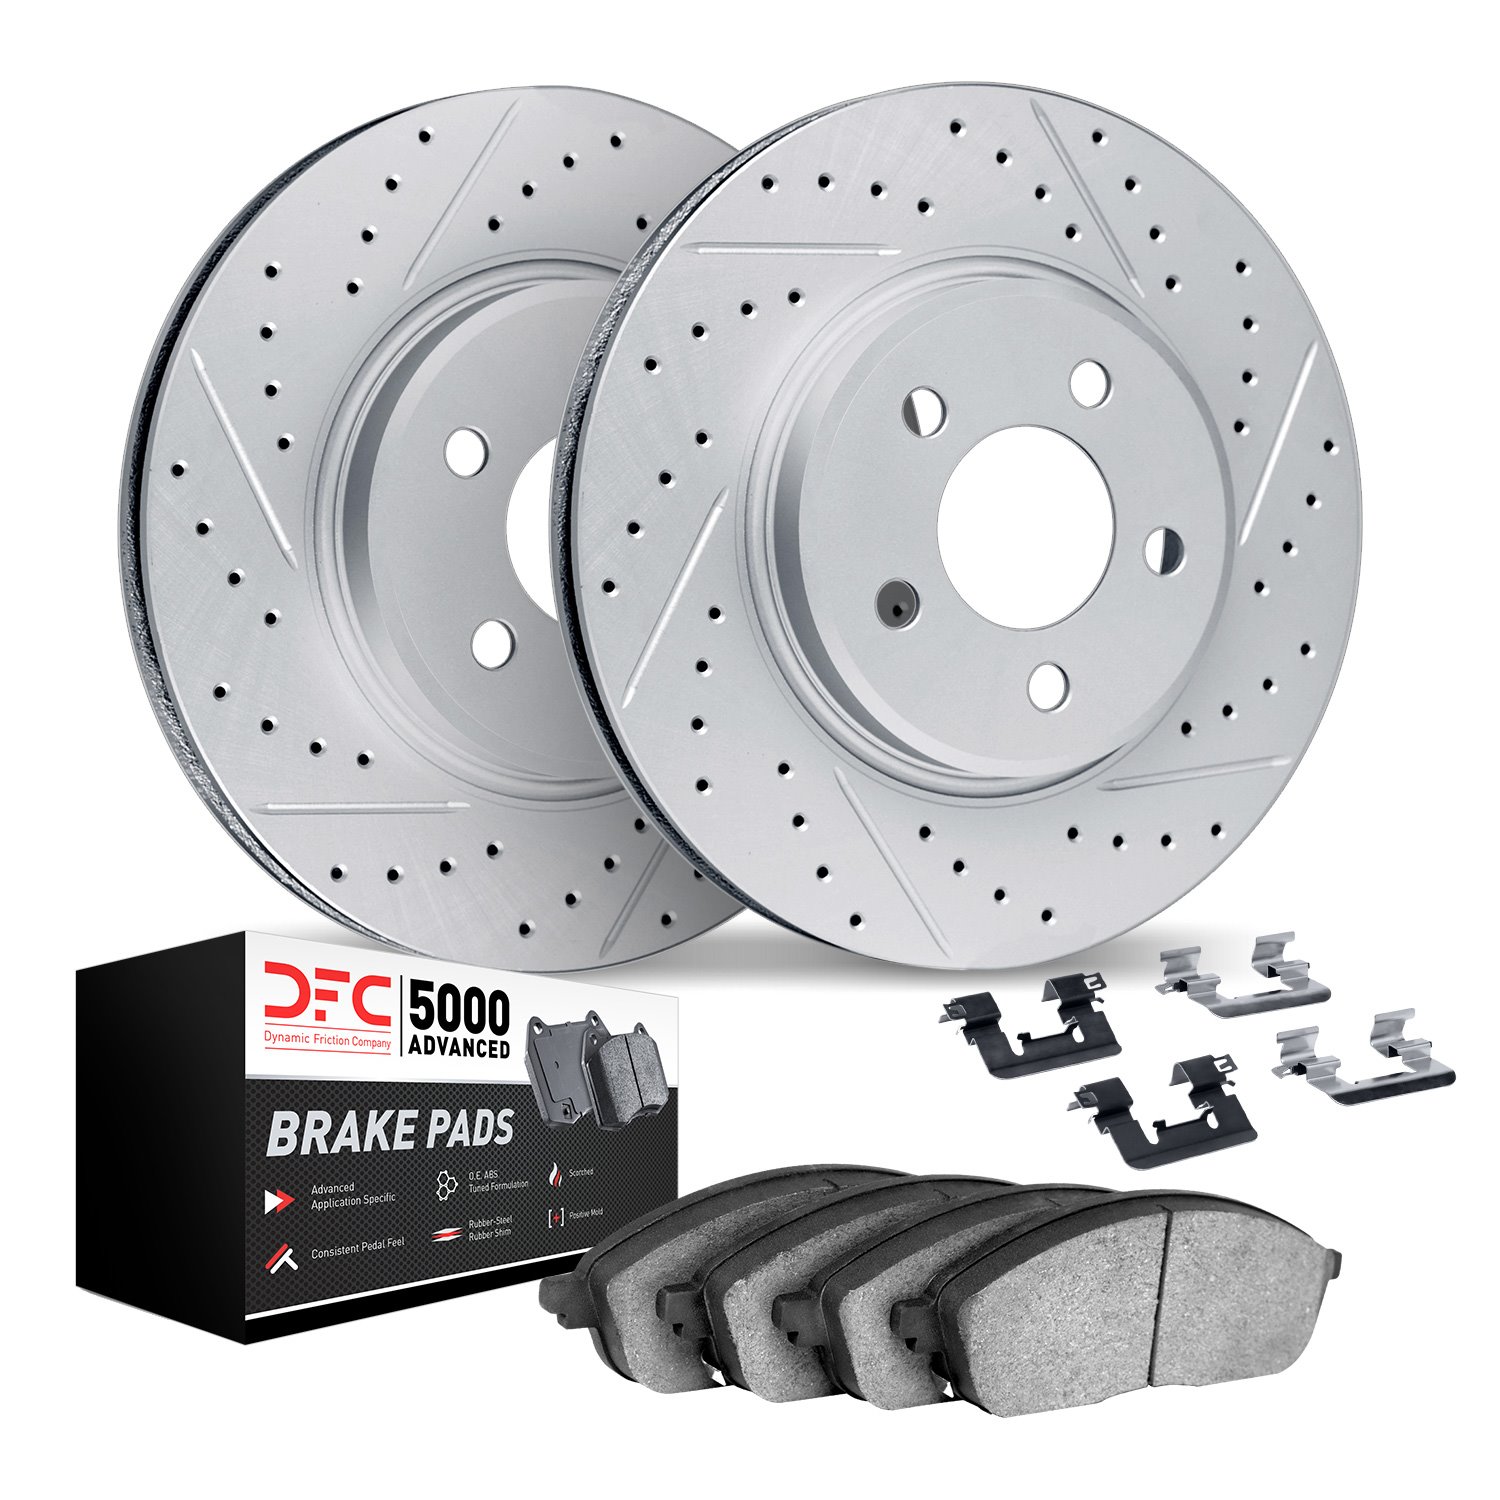 2512-54065 Geoperformance Drilled/Slotted Rotors w/5000 Advanced Brake Pads Kit & Hardware, Fits Select Ford/Lincoln/Mercury/Maz